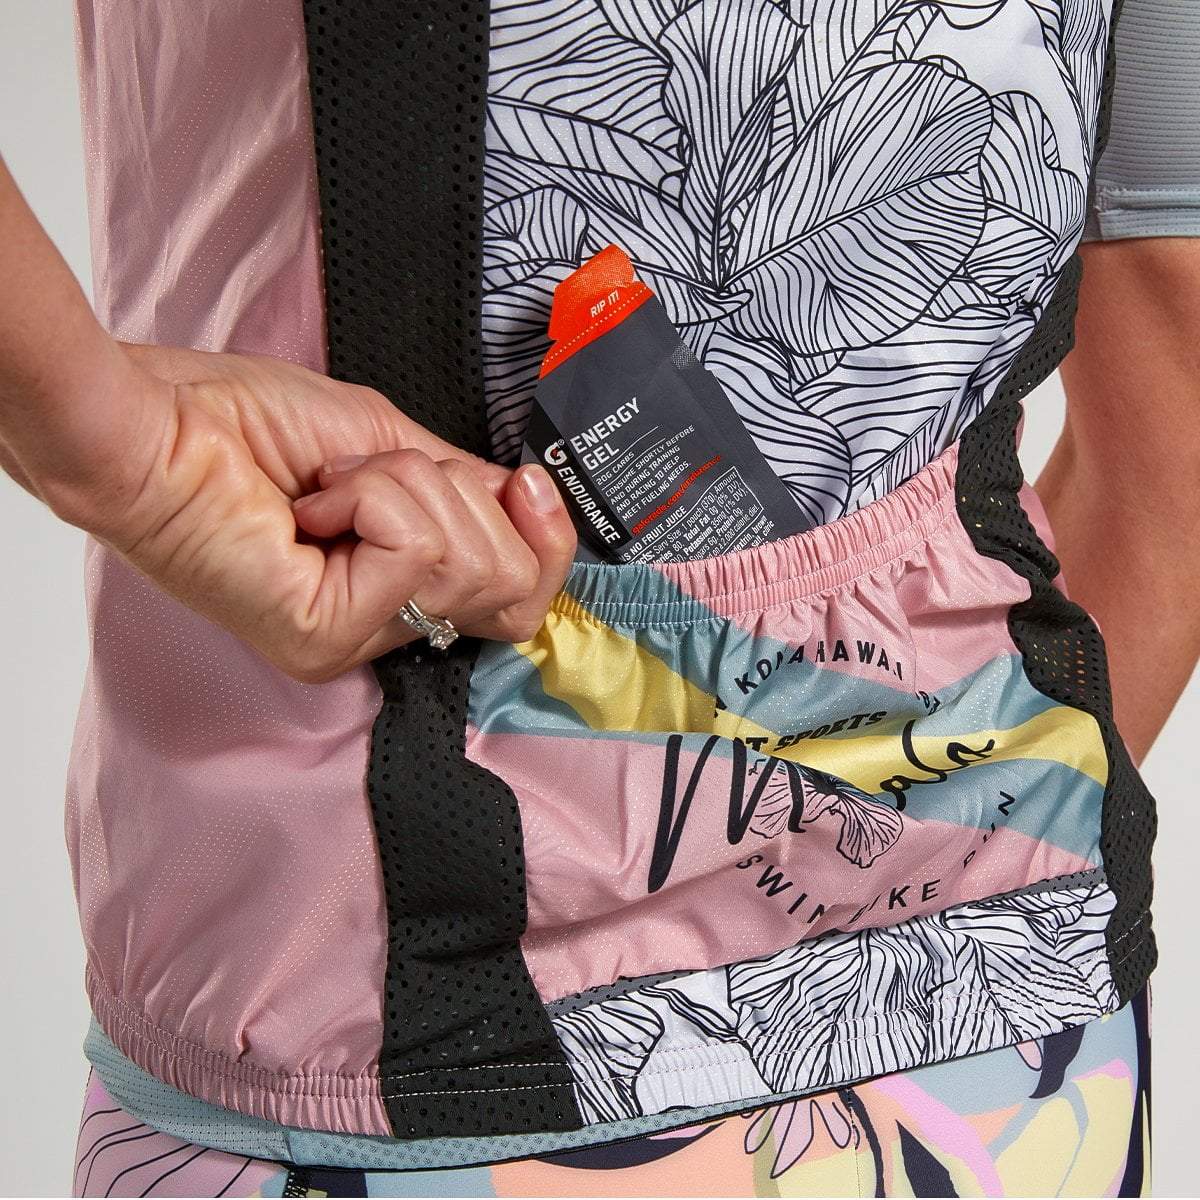 Zoot Sports CYCLE APPAREL WOMENS LTD CYCLE VEST - MAHALO